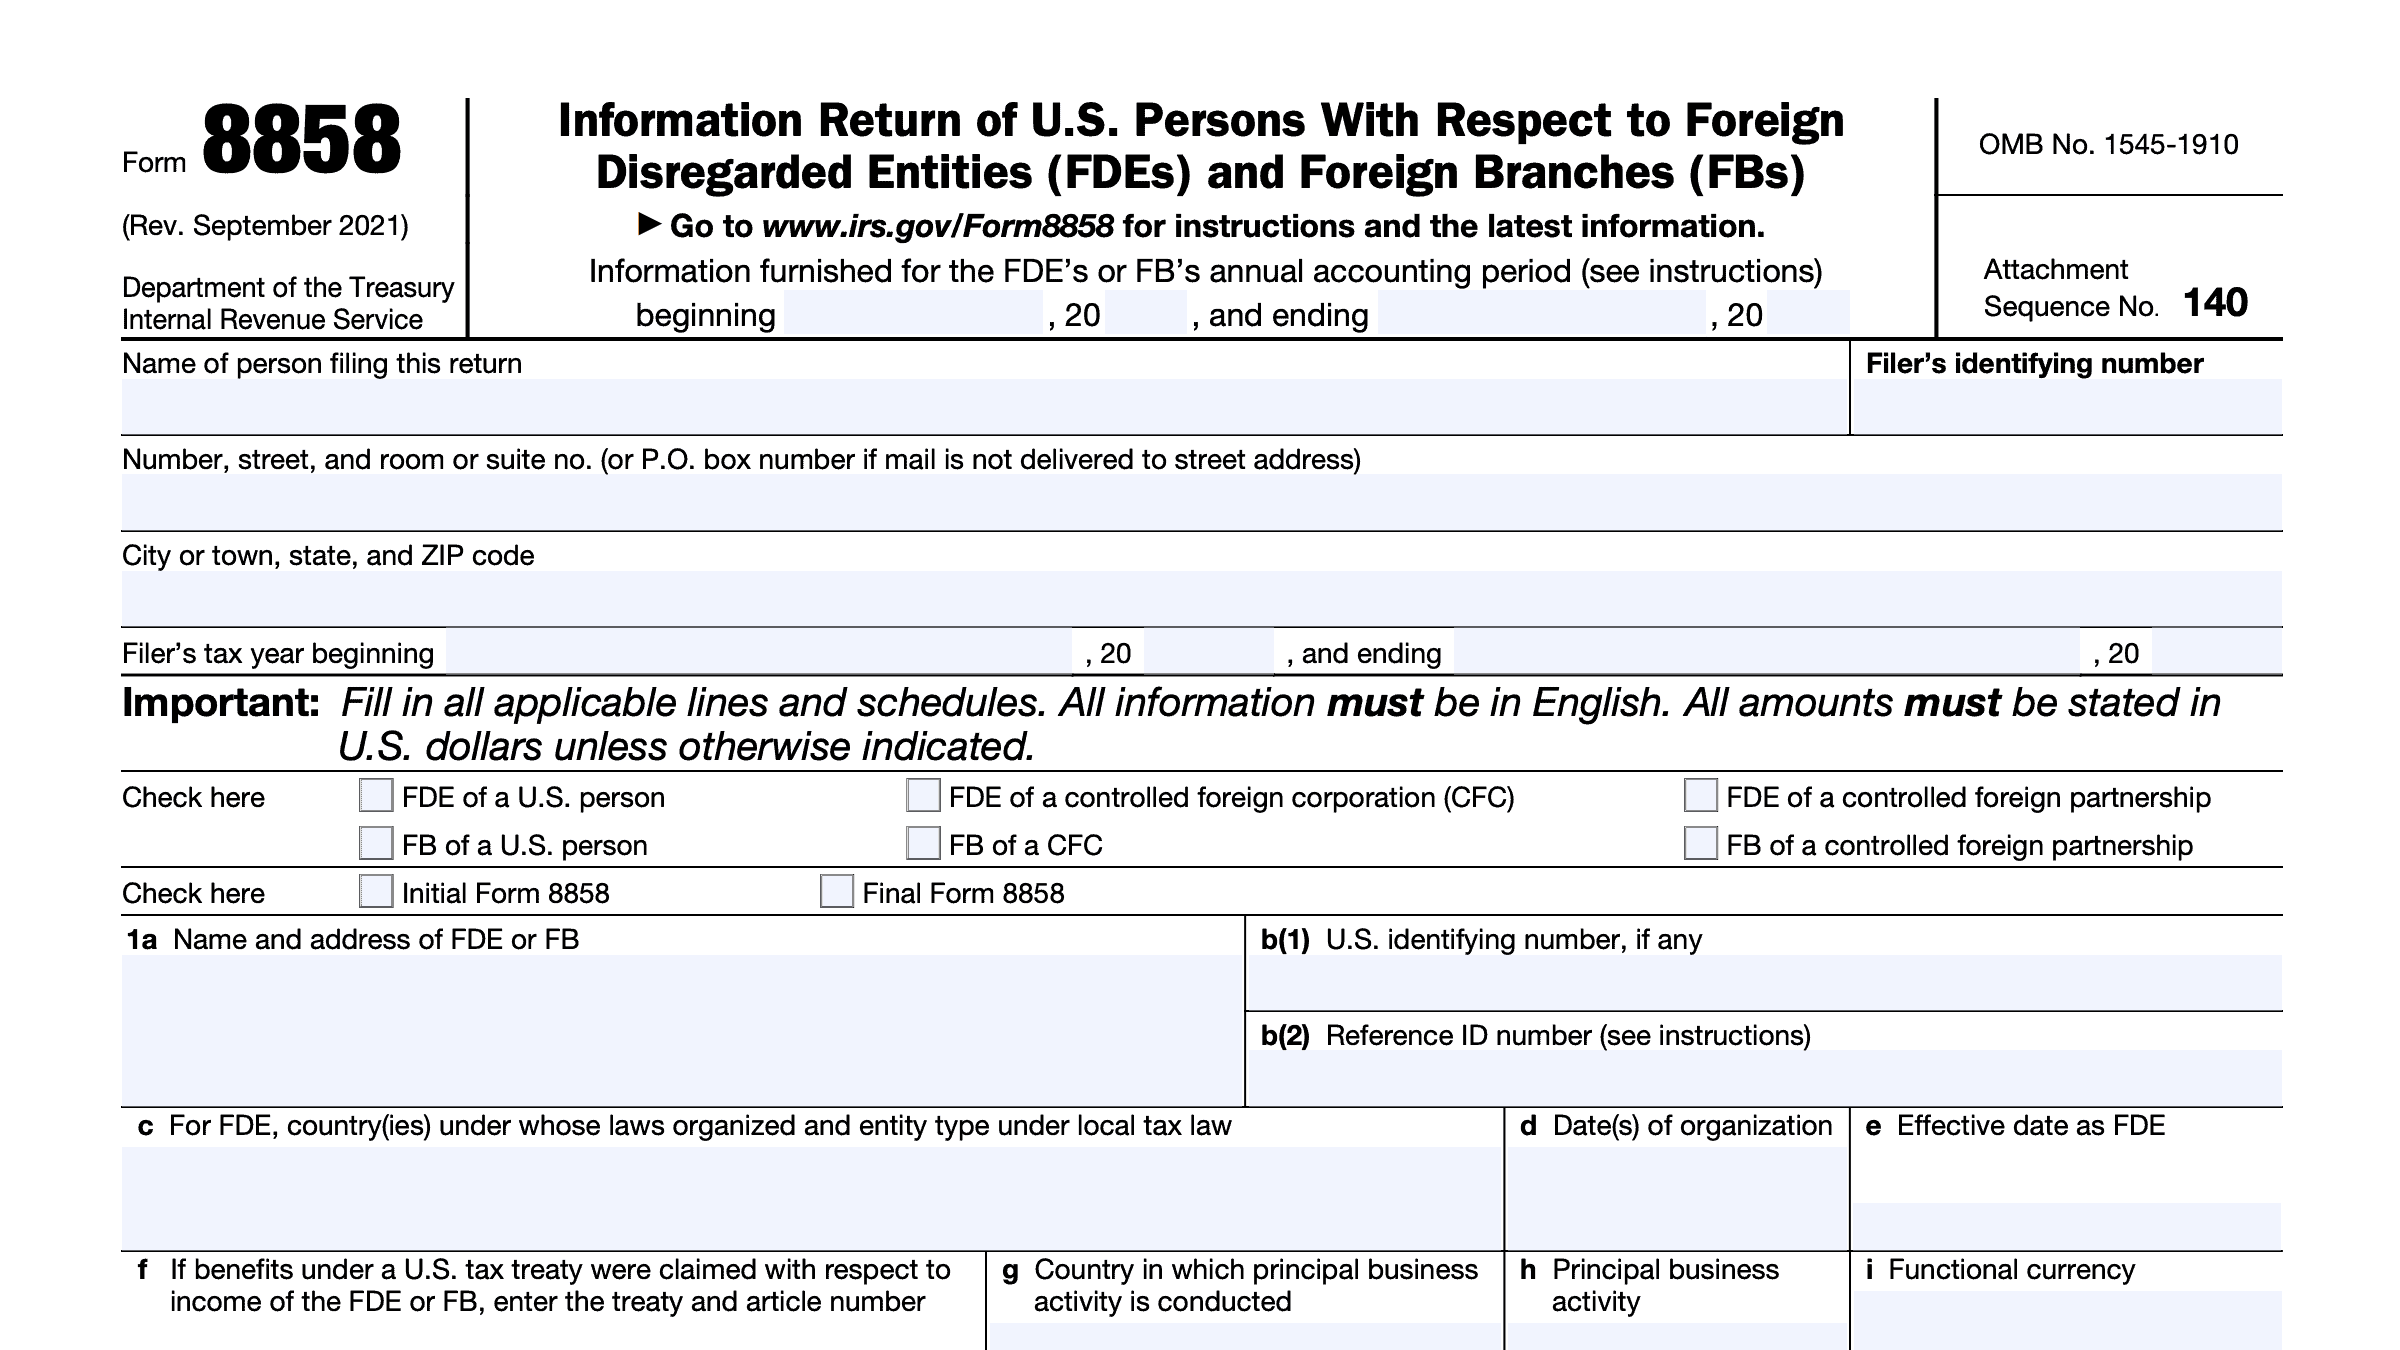 IRS Form 8858 Instructions Information Return for FDEs FBs